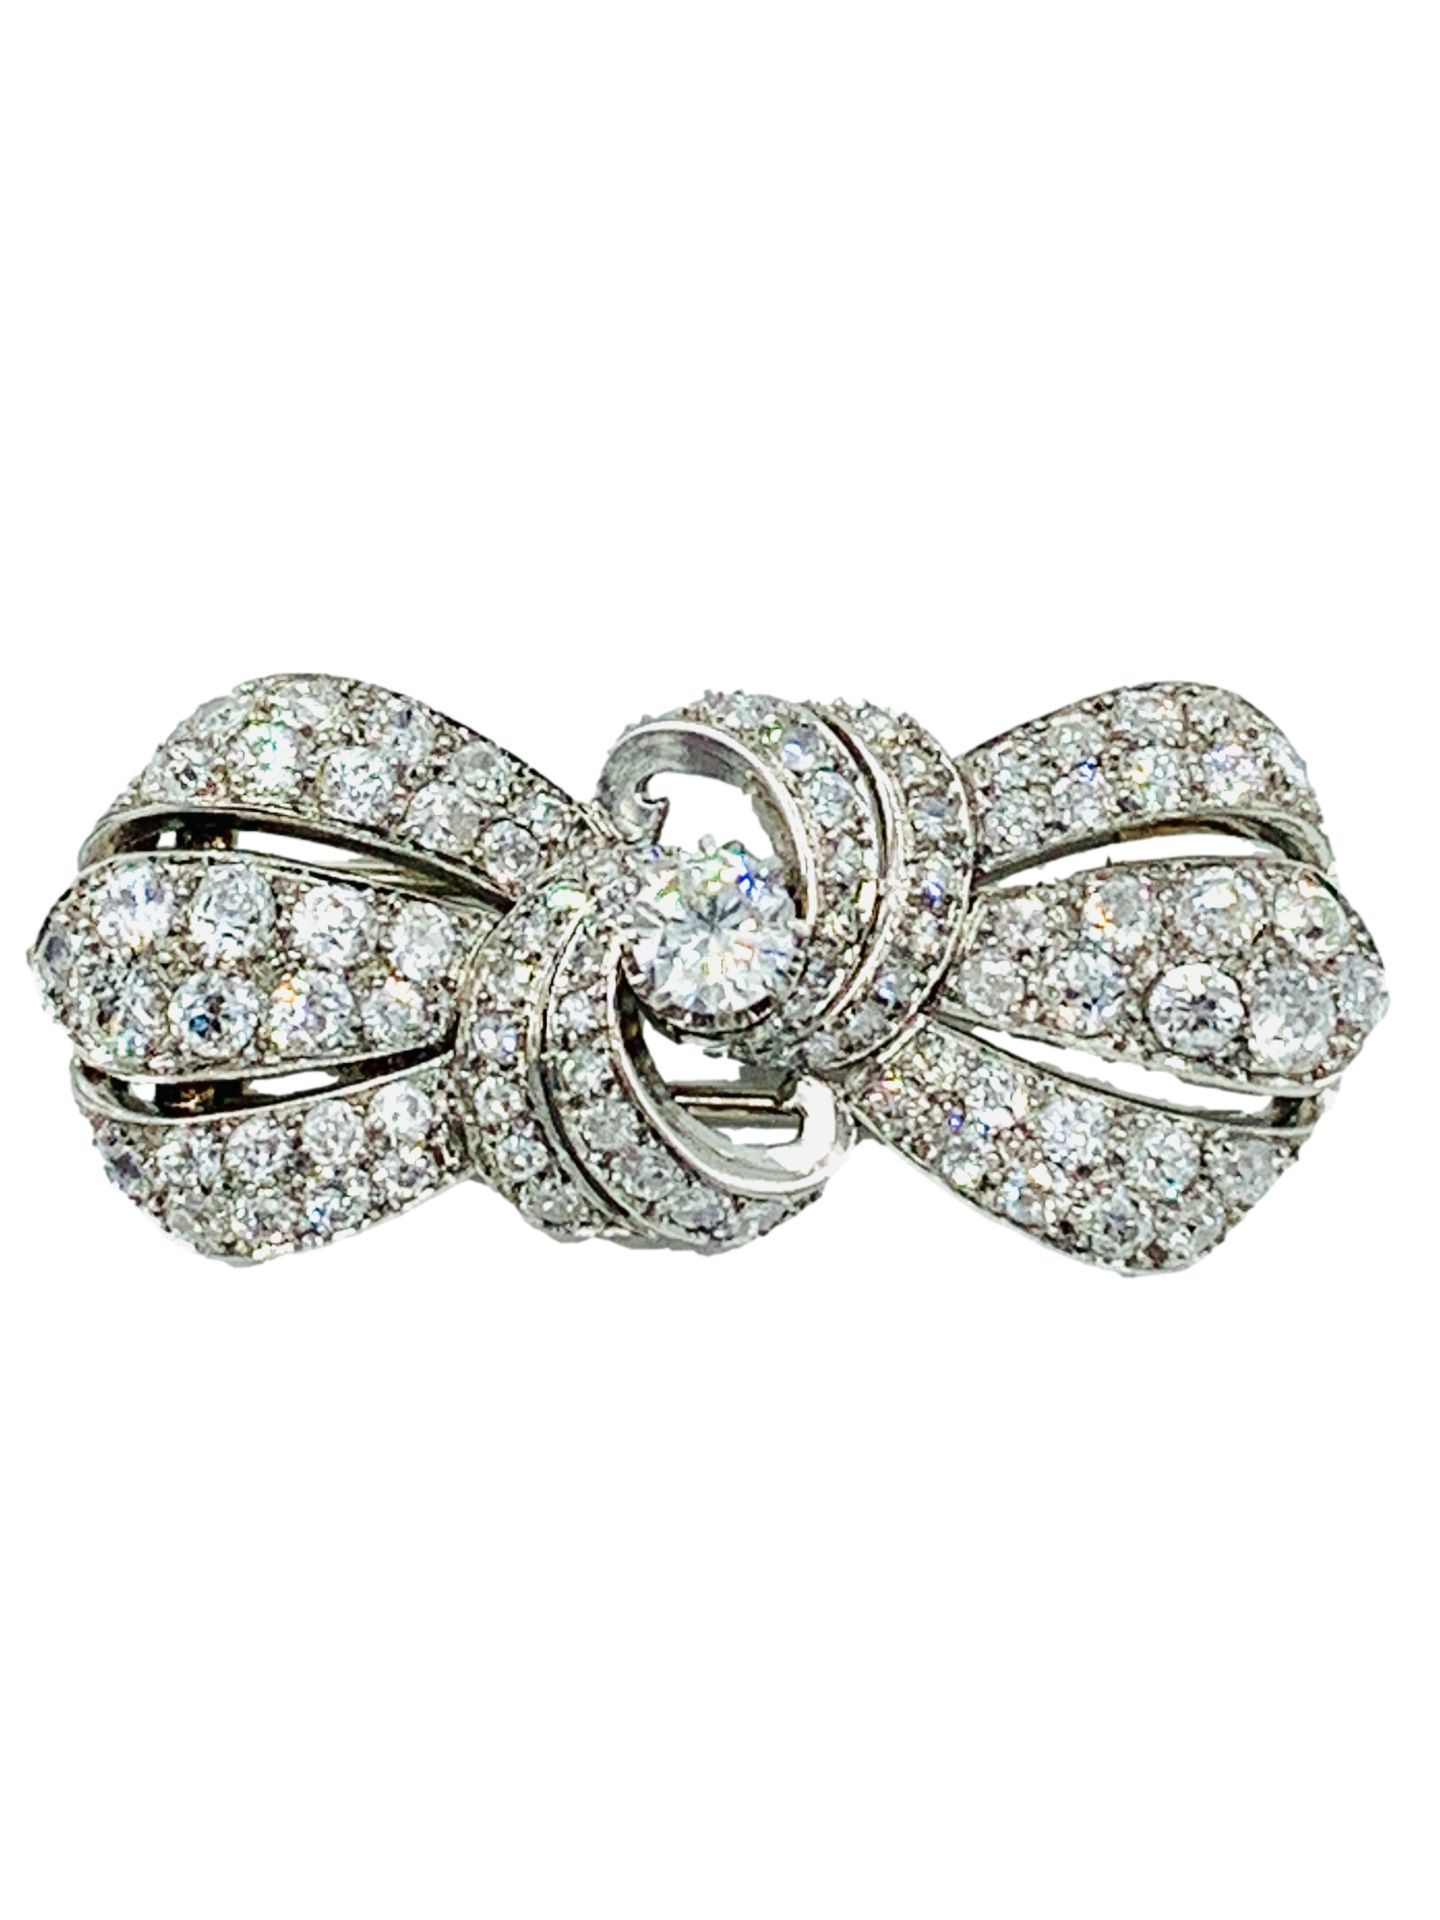 18ct gold and diamond clip brooch, centre stone approximately 1.3ct - Image 3 of 8